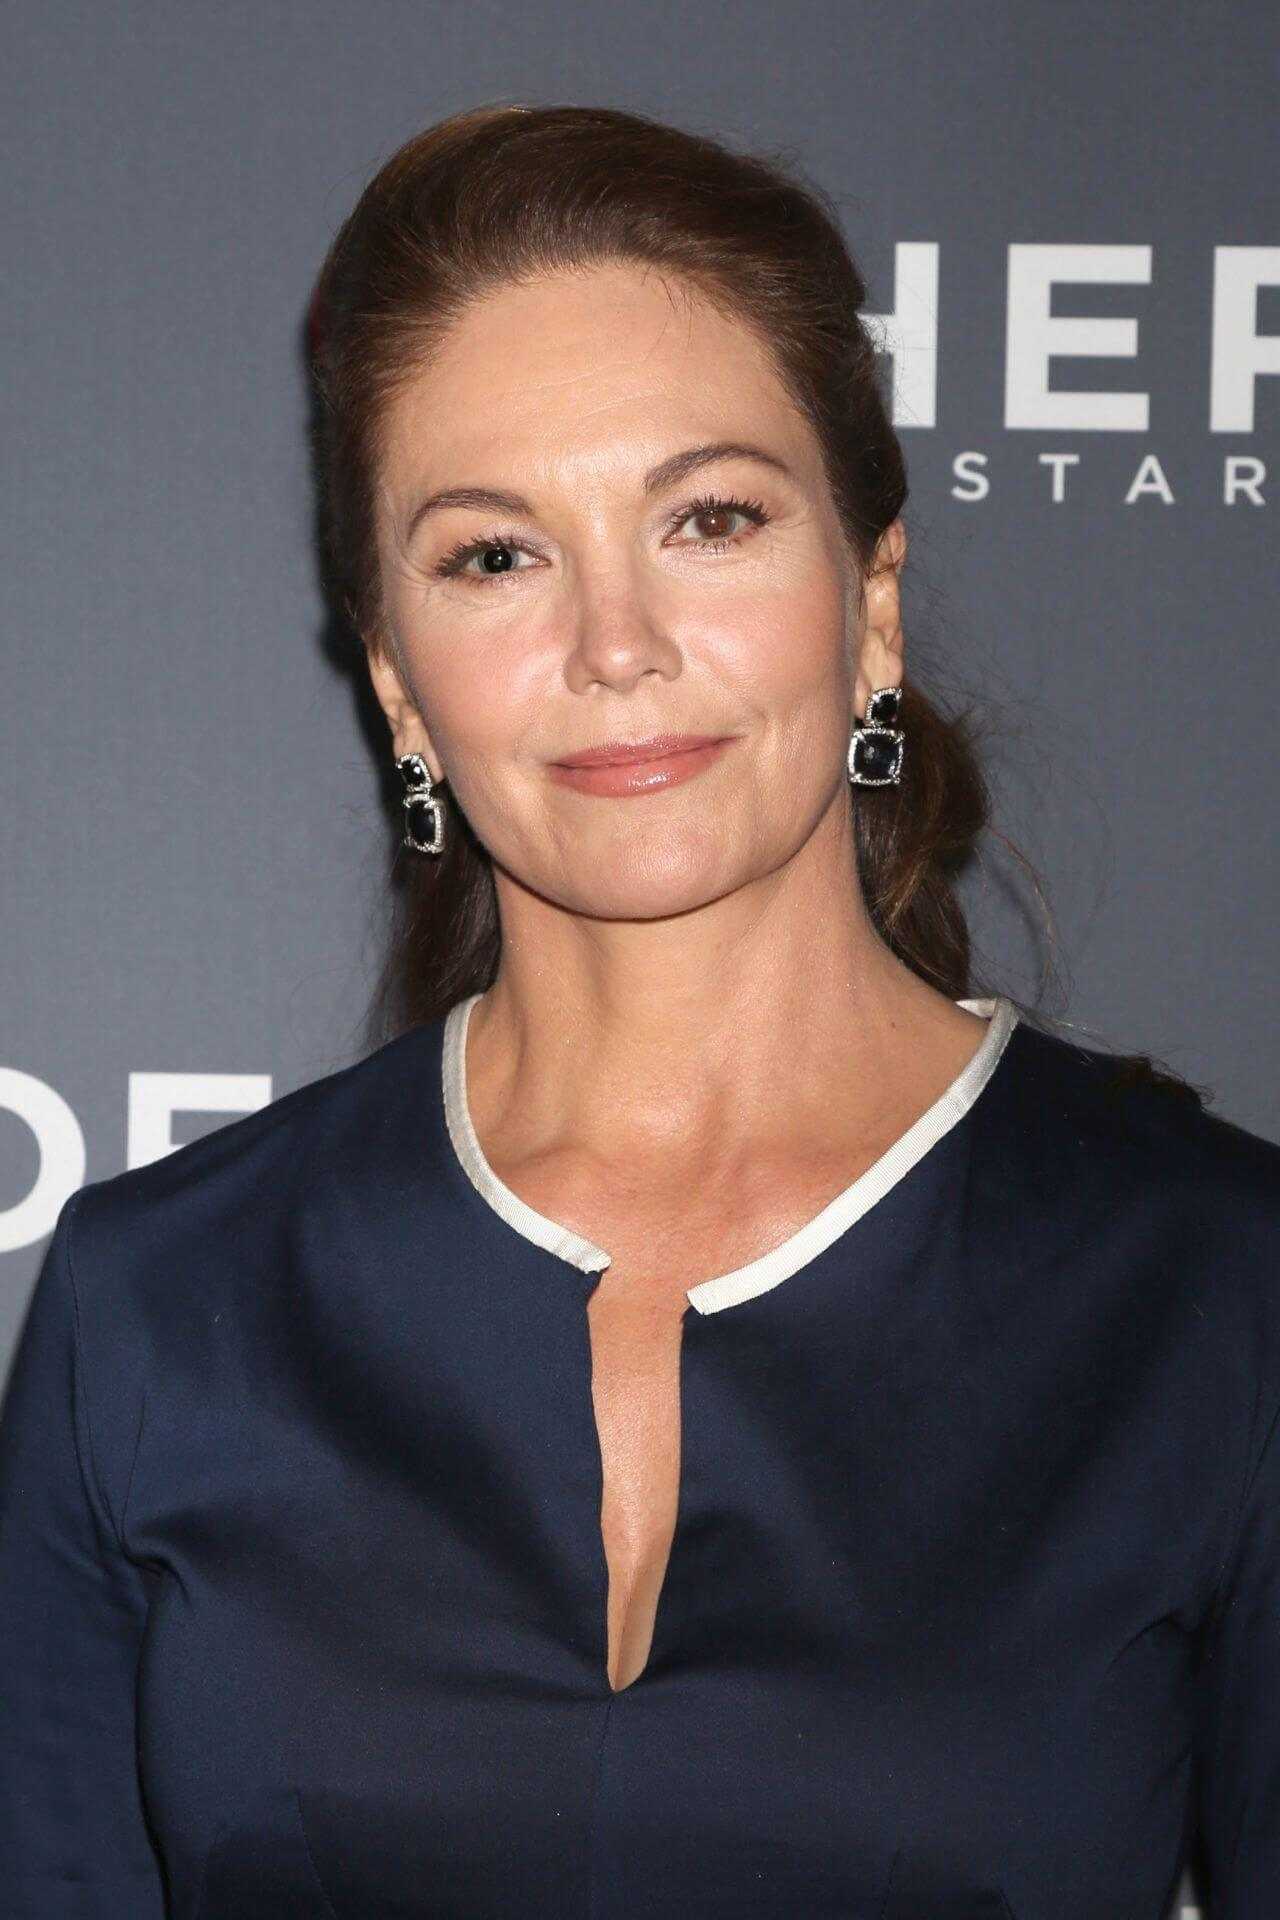 50 Nude Pictures Of Diane Lane Are A Charm For Her Fans.